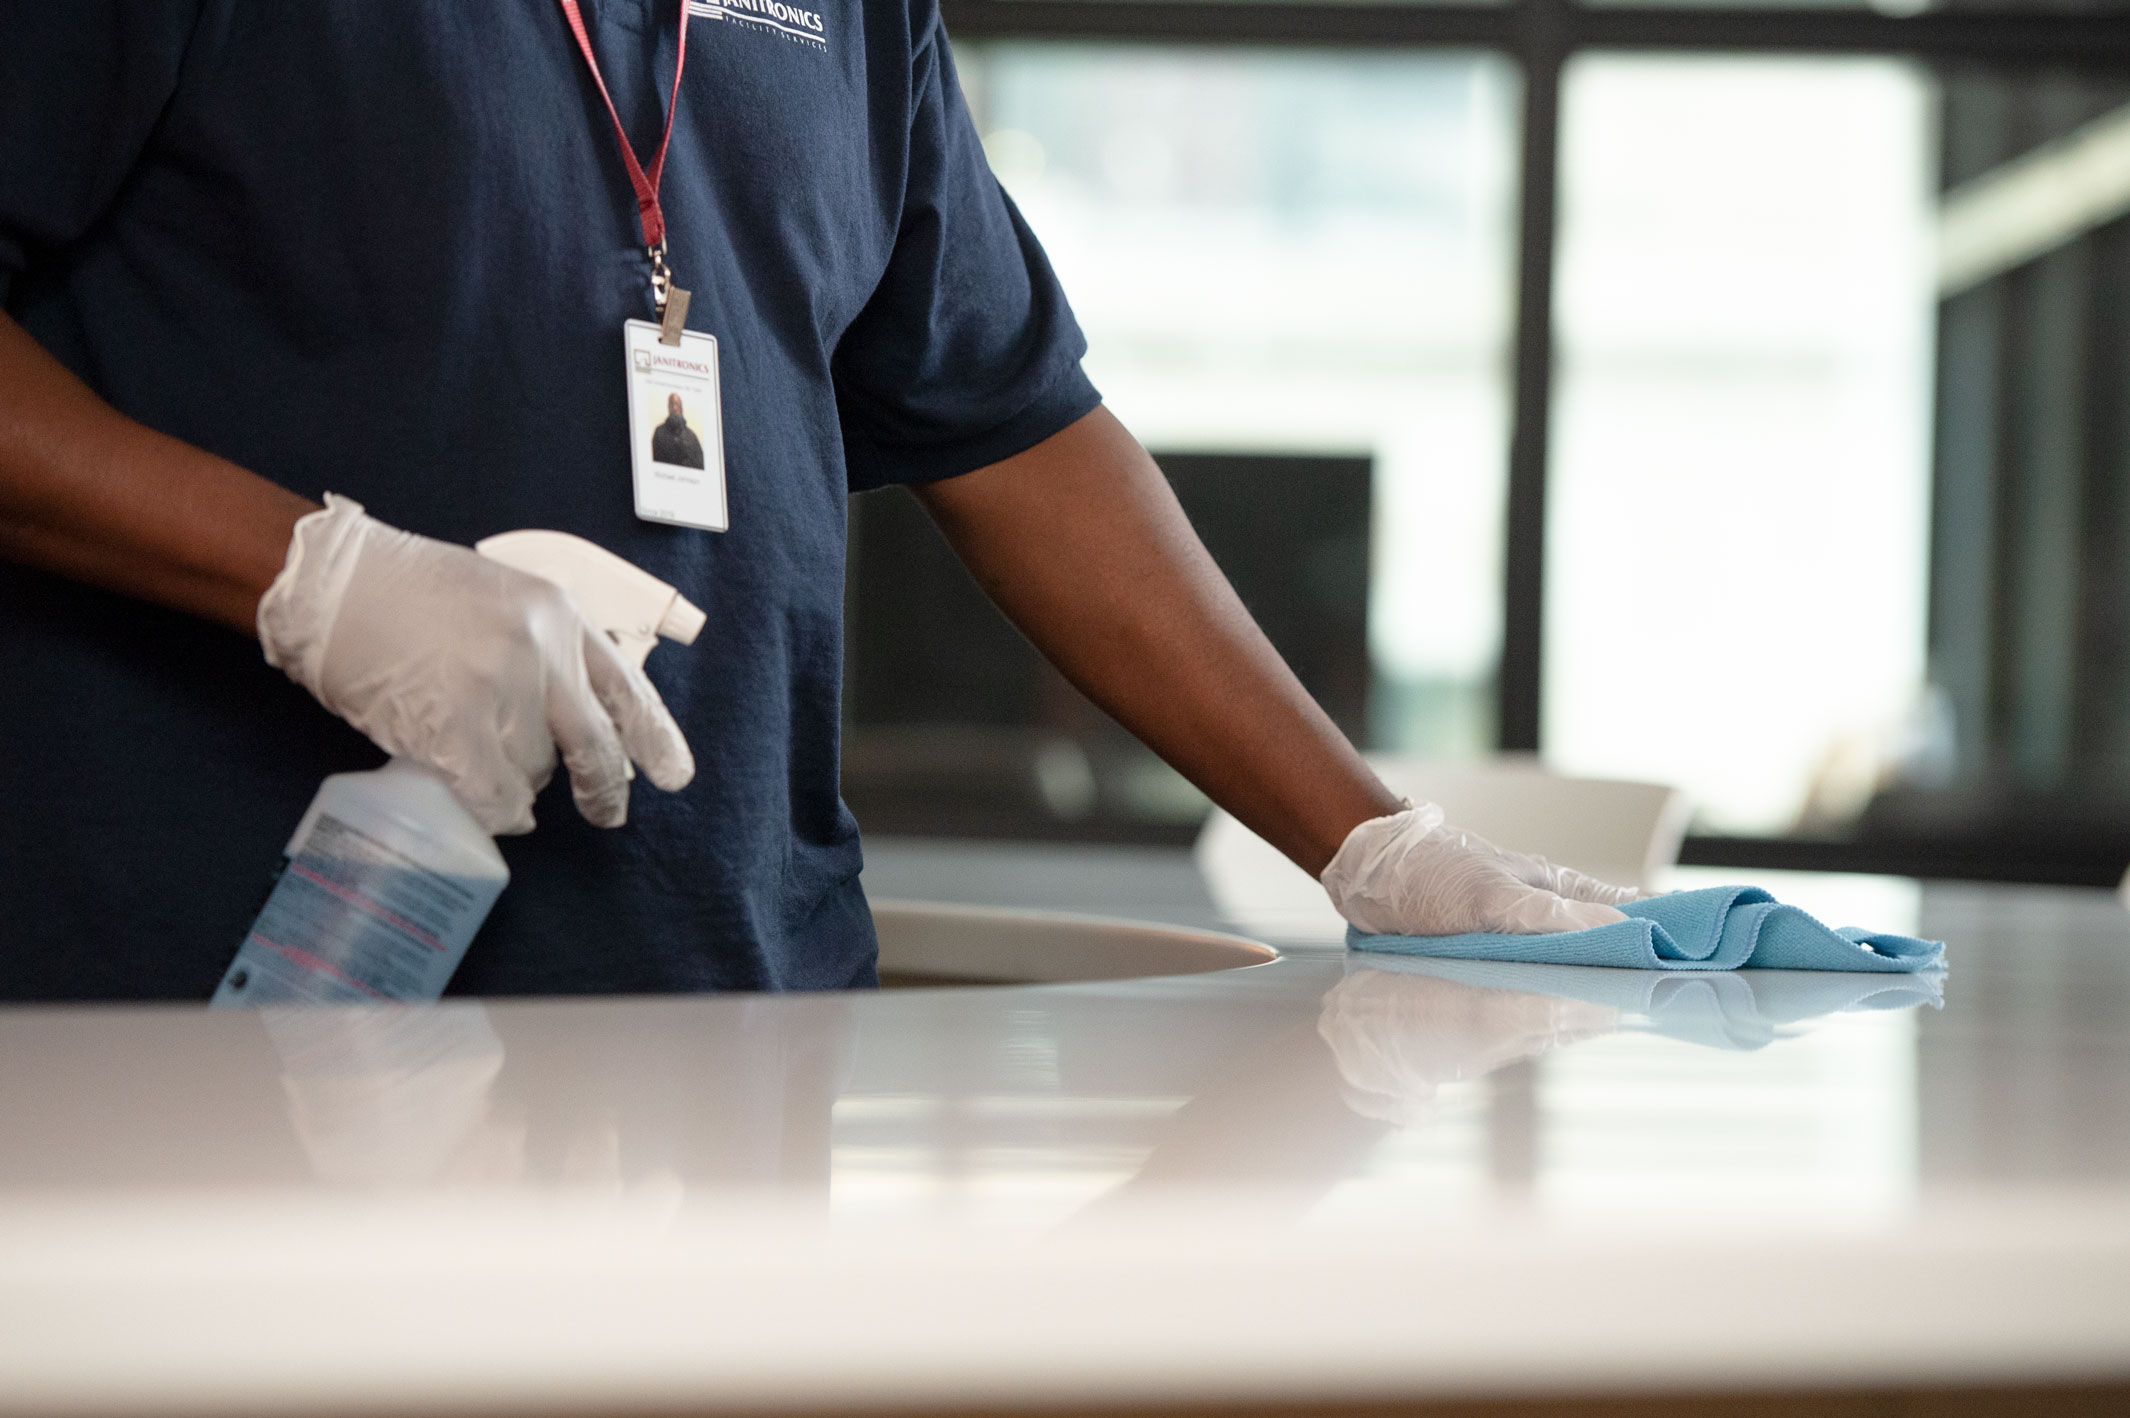 Employee cleaning office countertop with cleaning solution and blue cloth